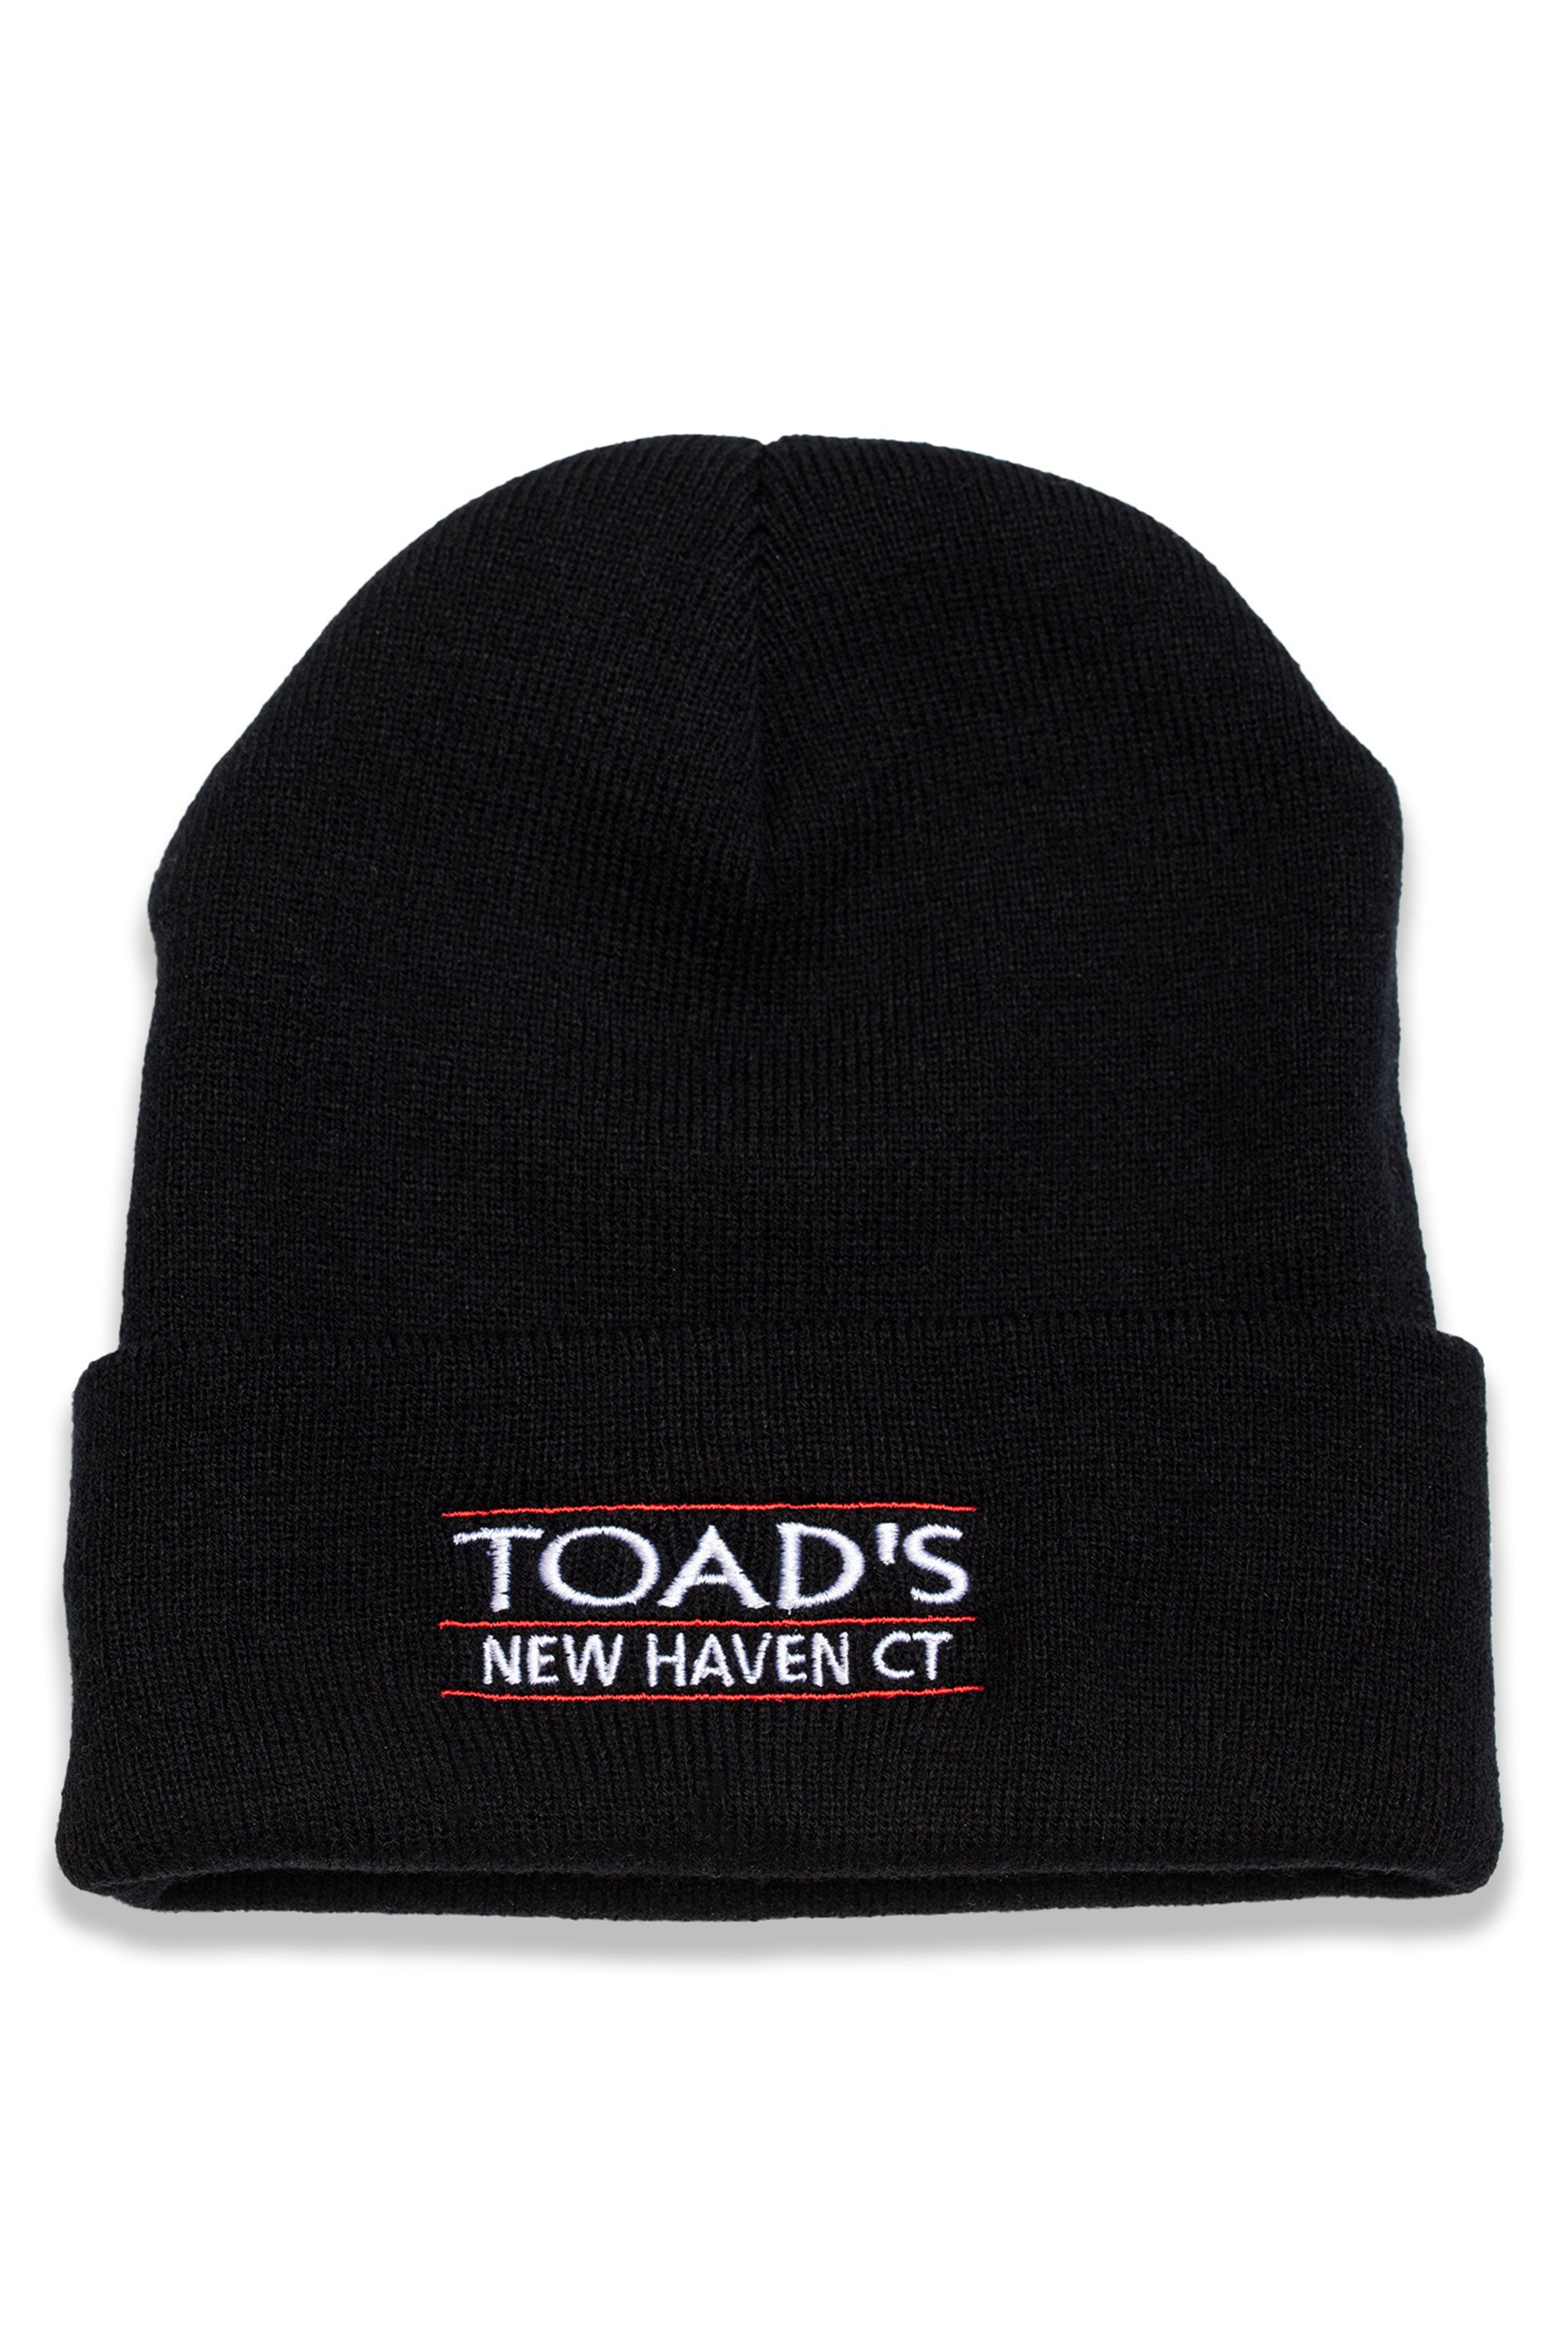 Toad's Place Beanie